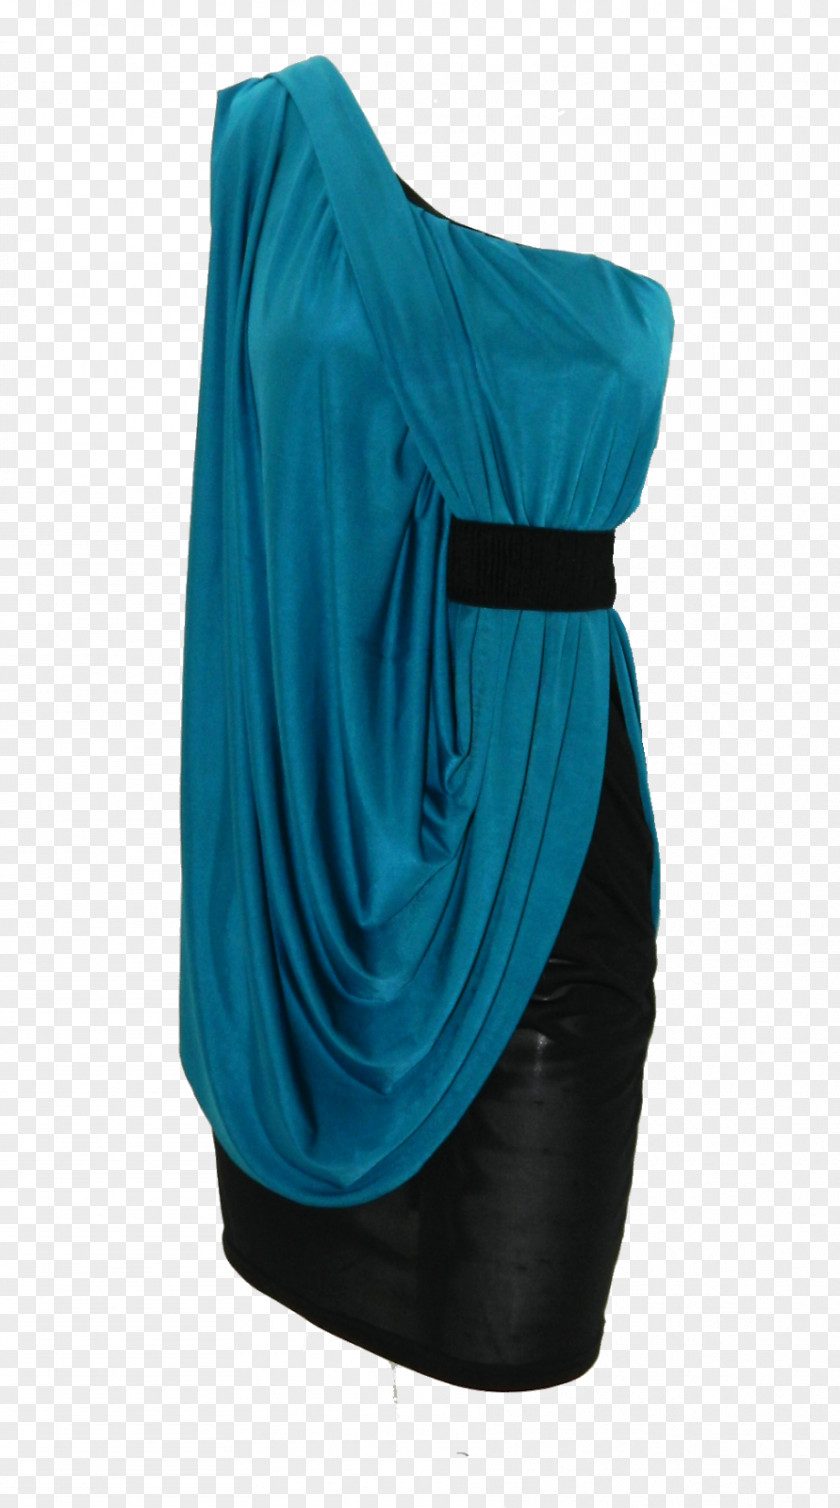 Blue Evening Gown Shoulder Cocktail Dress Turquoise PNG